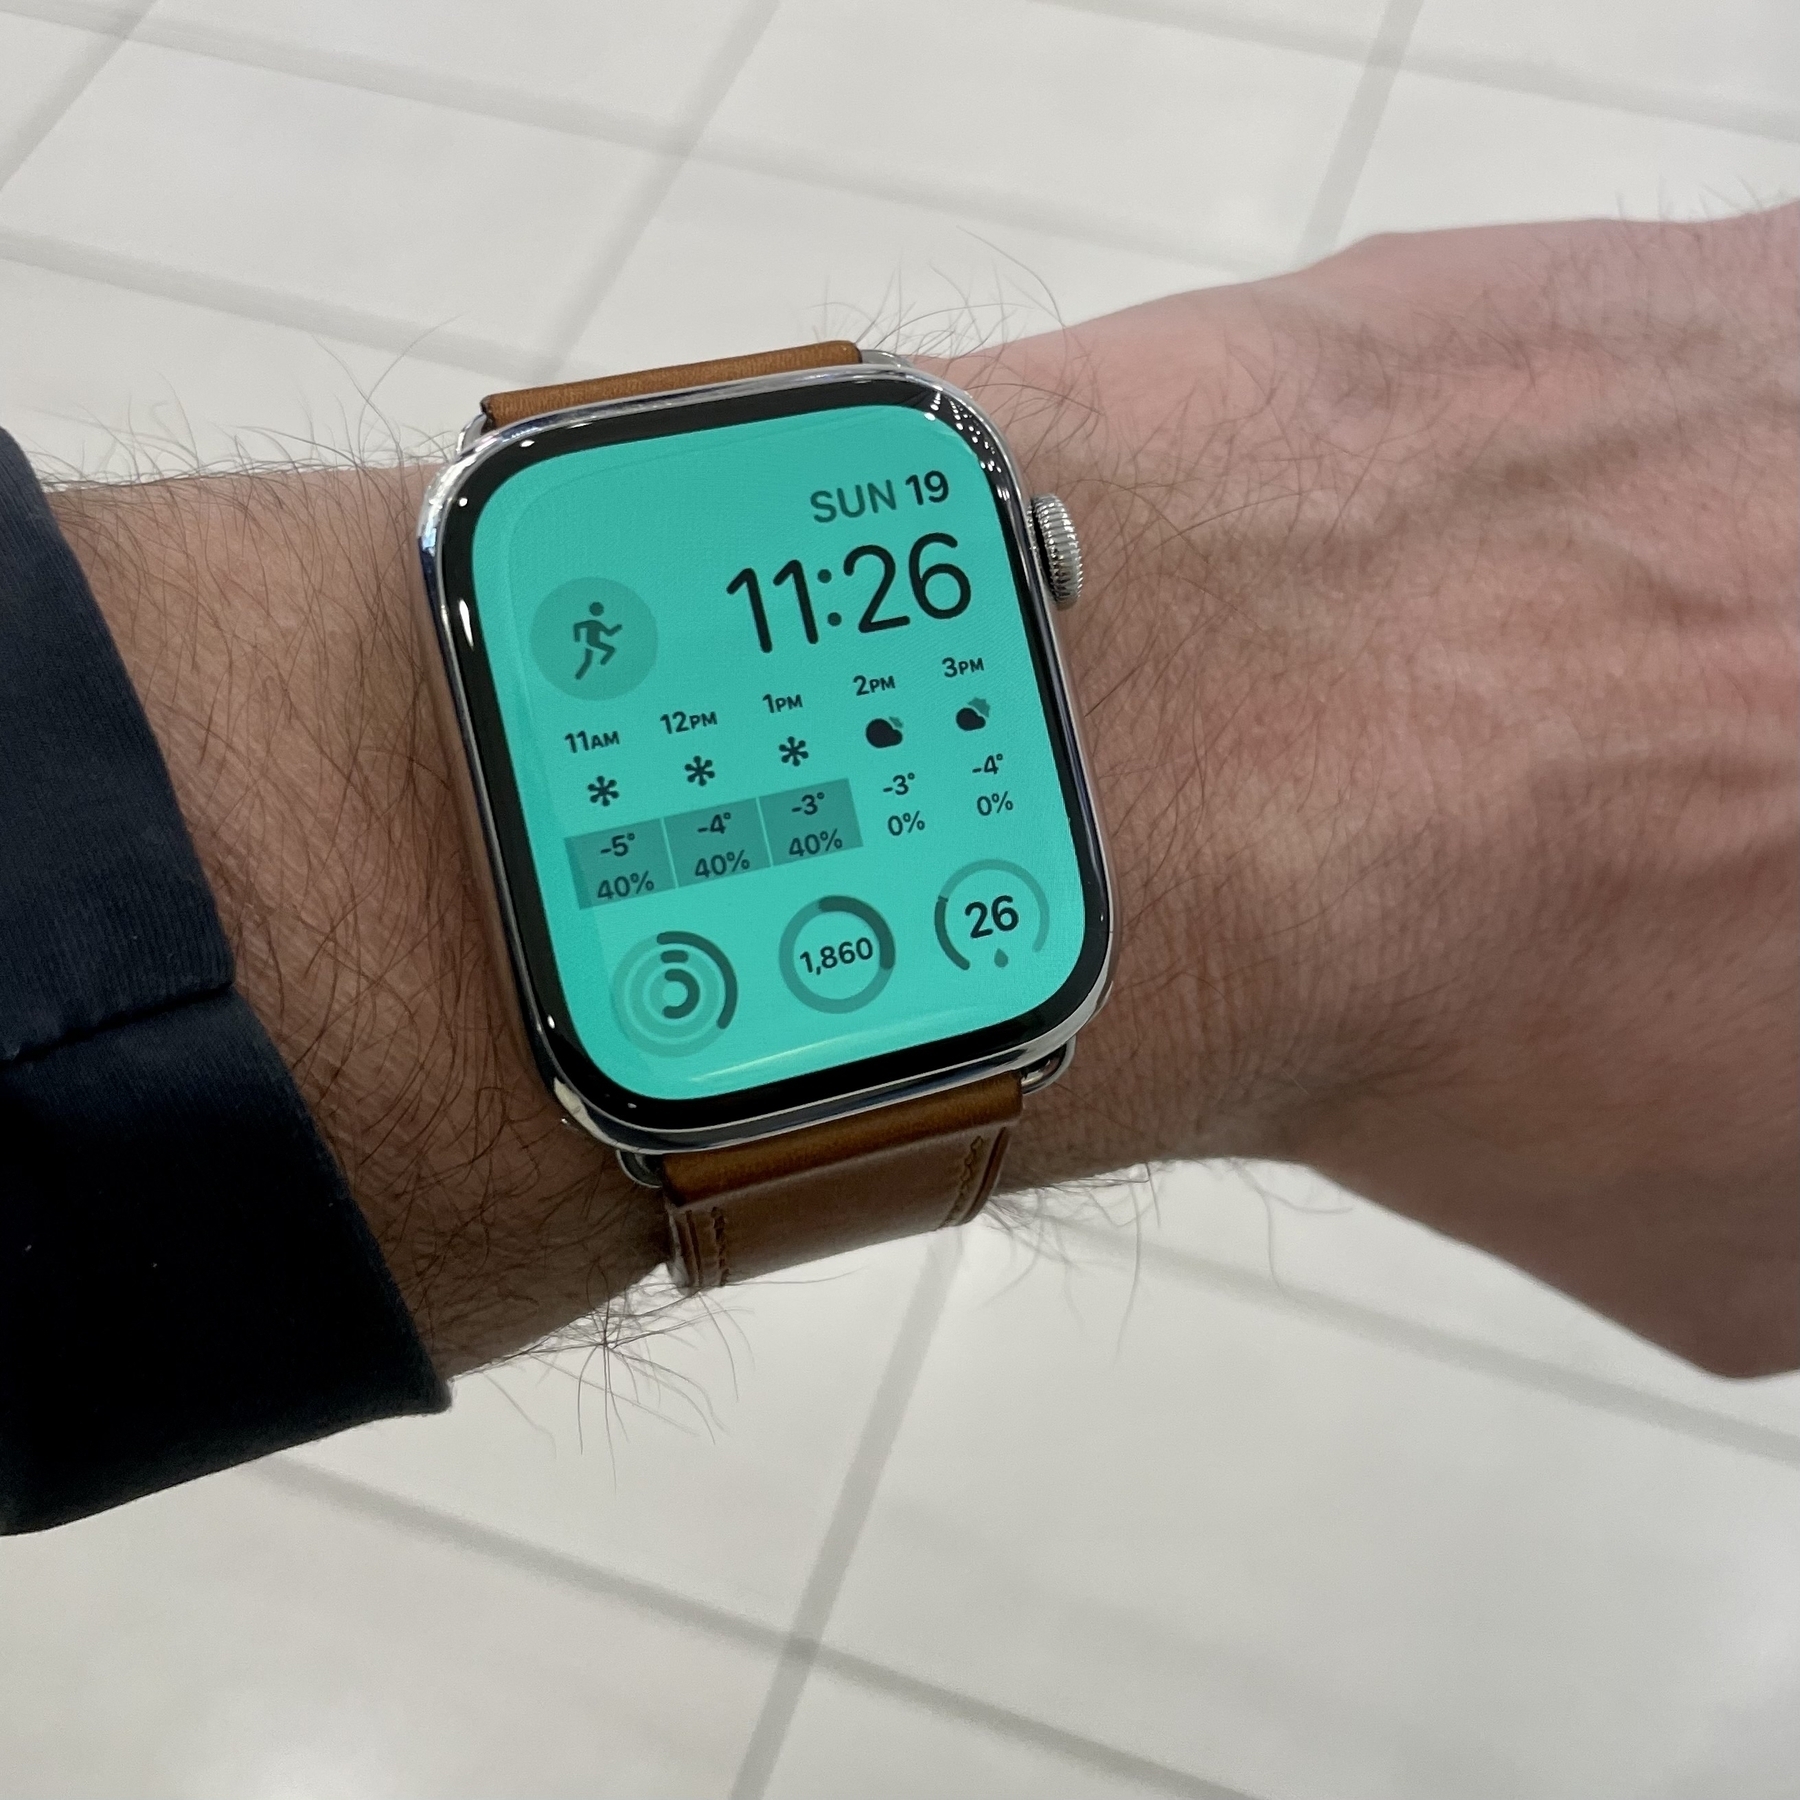 A stainless steel Apple Watch with brown leather strap is shown worn on my wrist, with a green modular watch face.